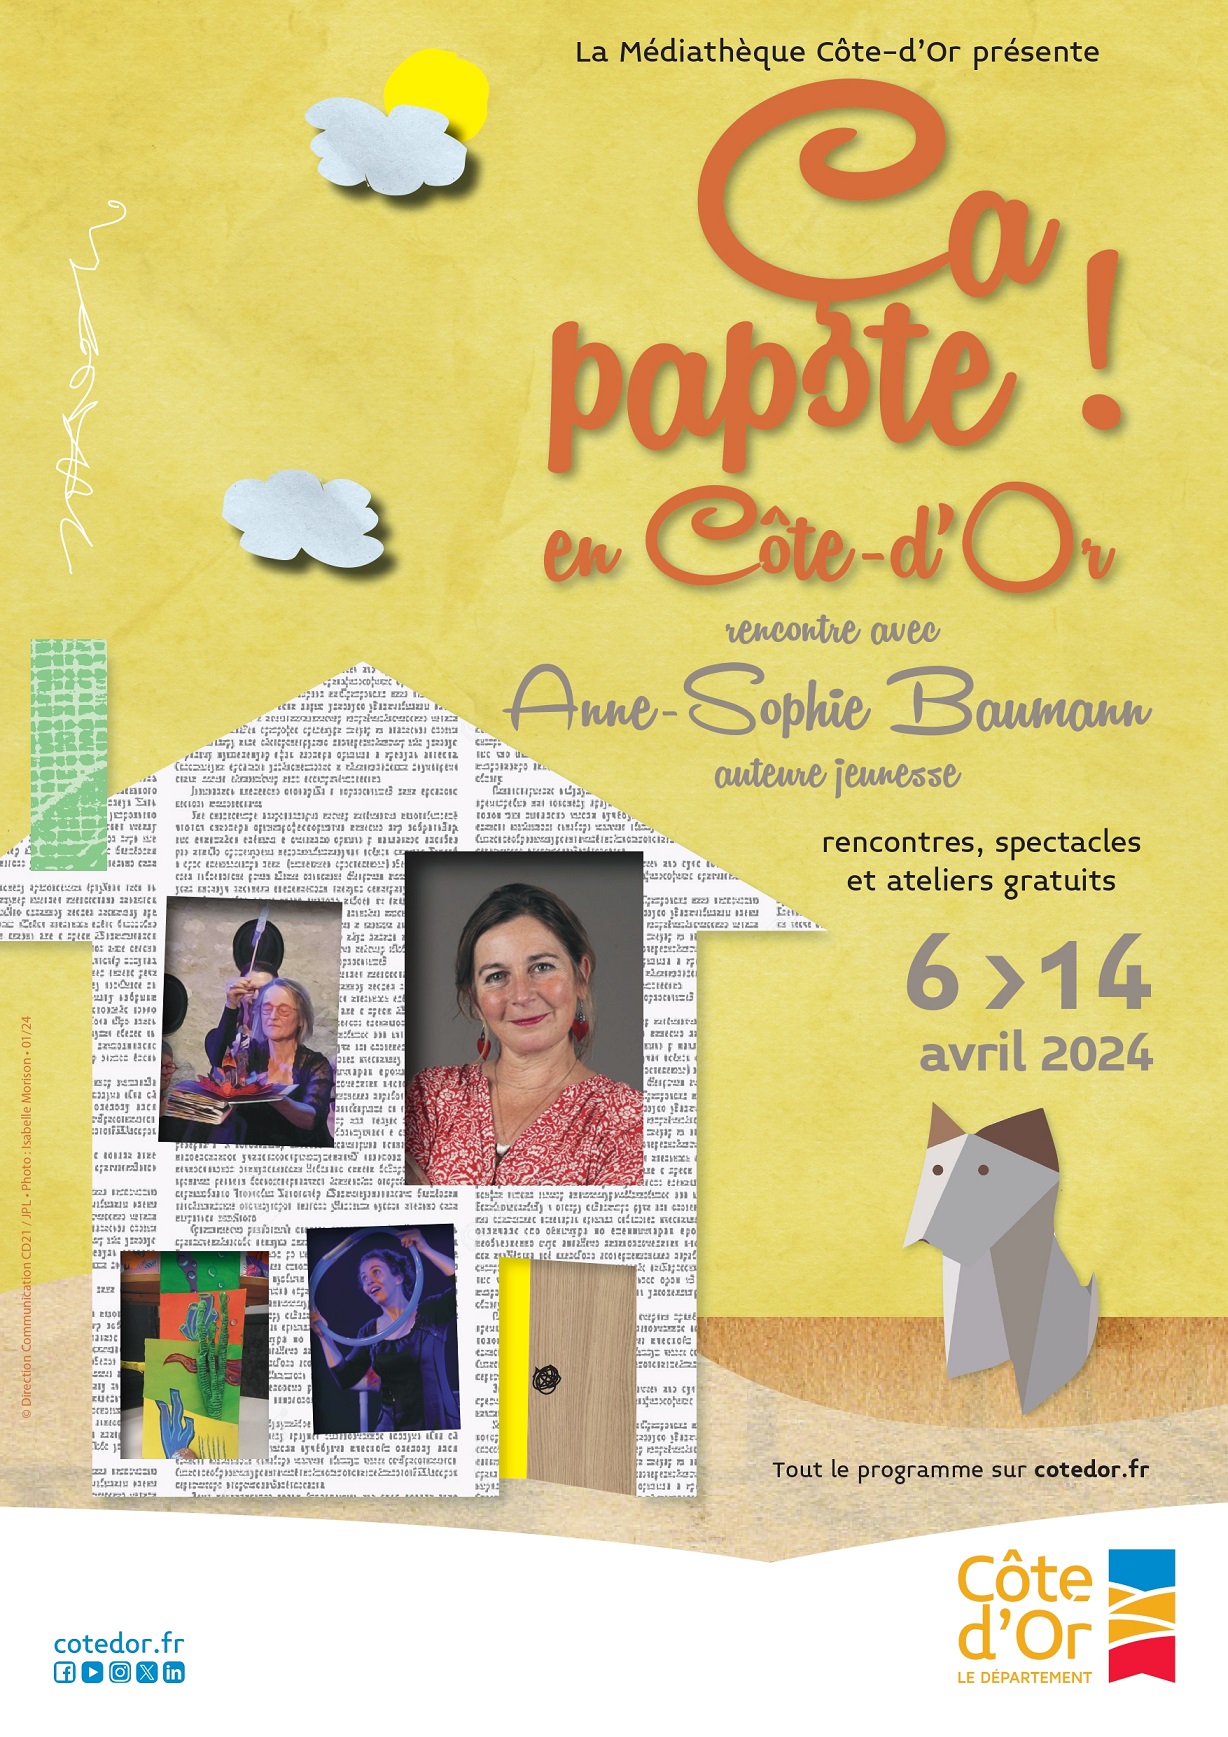 capapote.affiche_page-0001.jpg